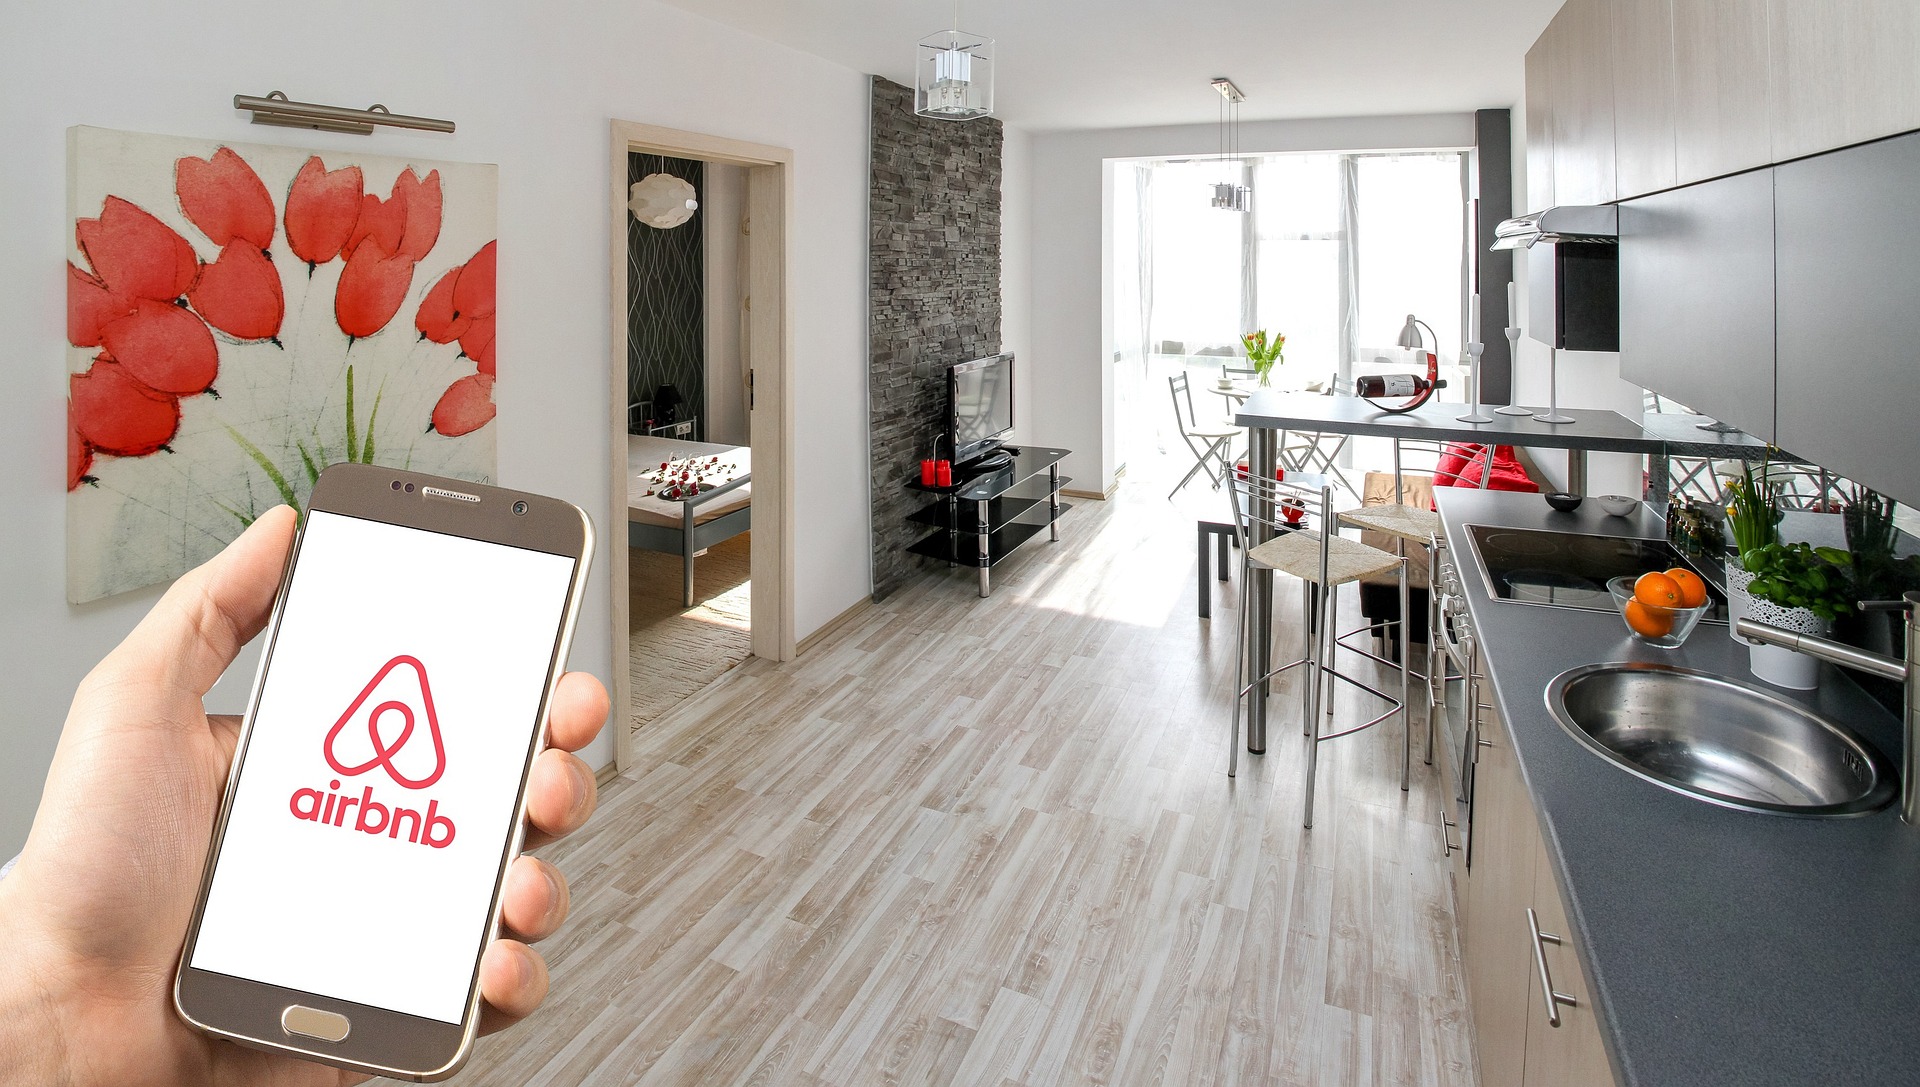 Is the Cleaning Fee Subject to the Airbnb Service Fees?